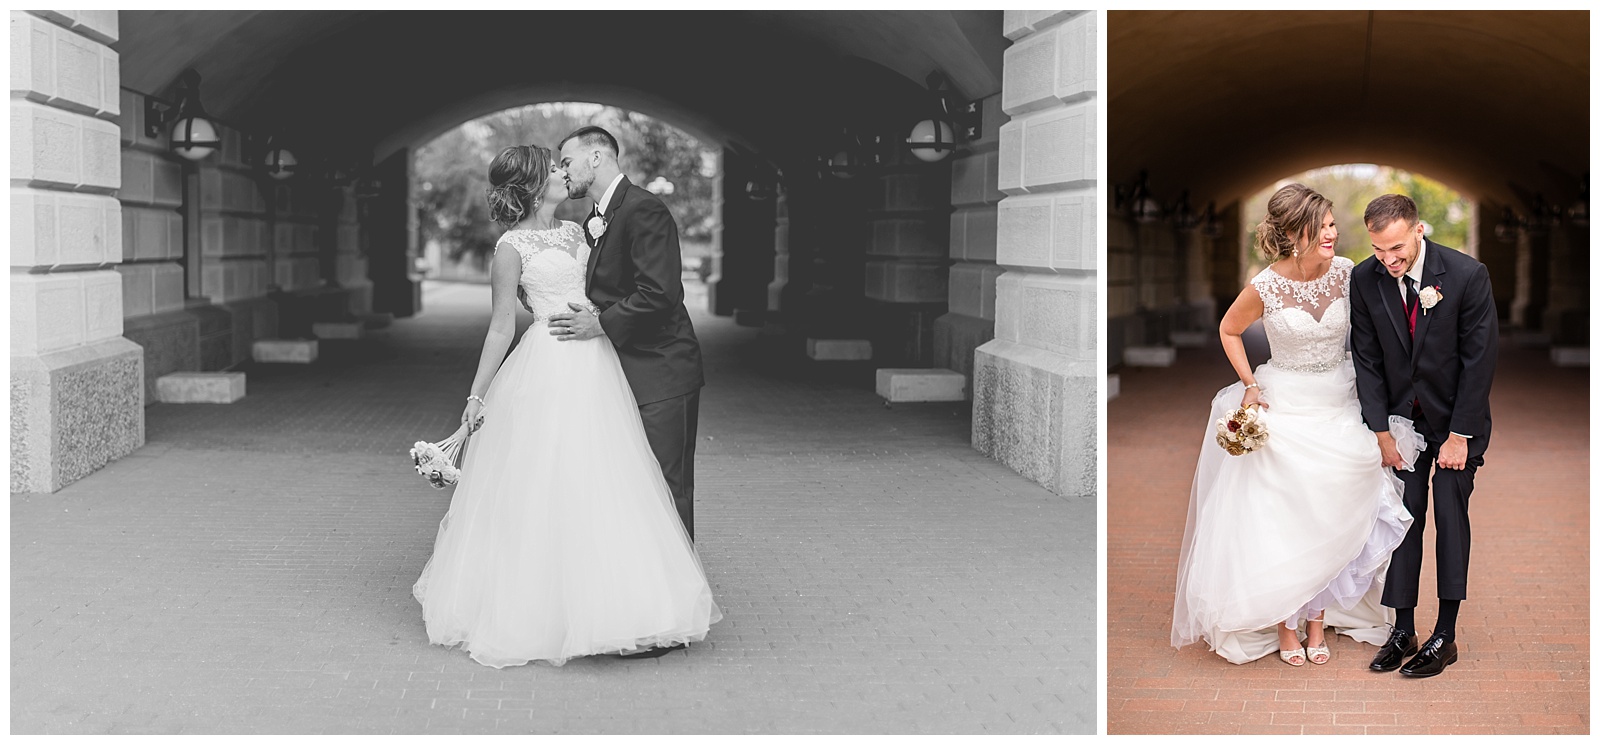 Wedding photography at the Kansas State Capitol Building in Topeka.